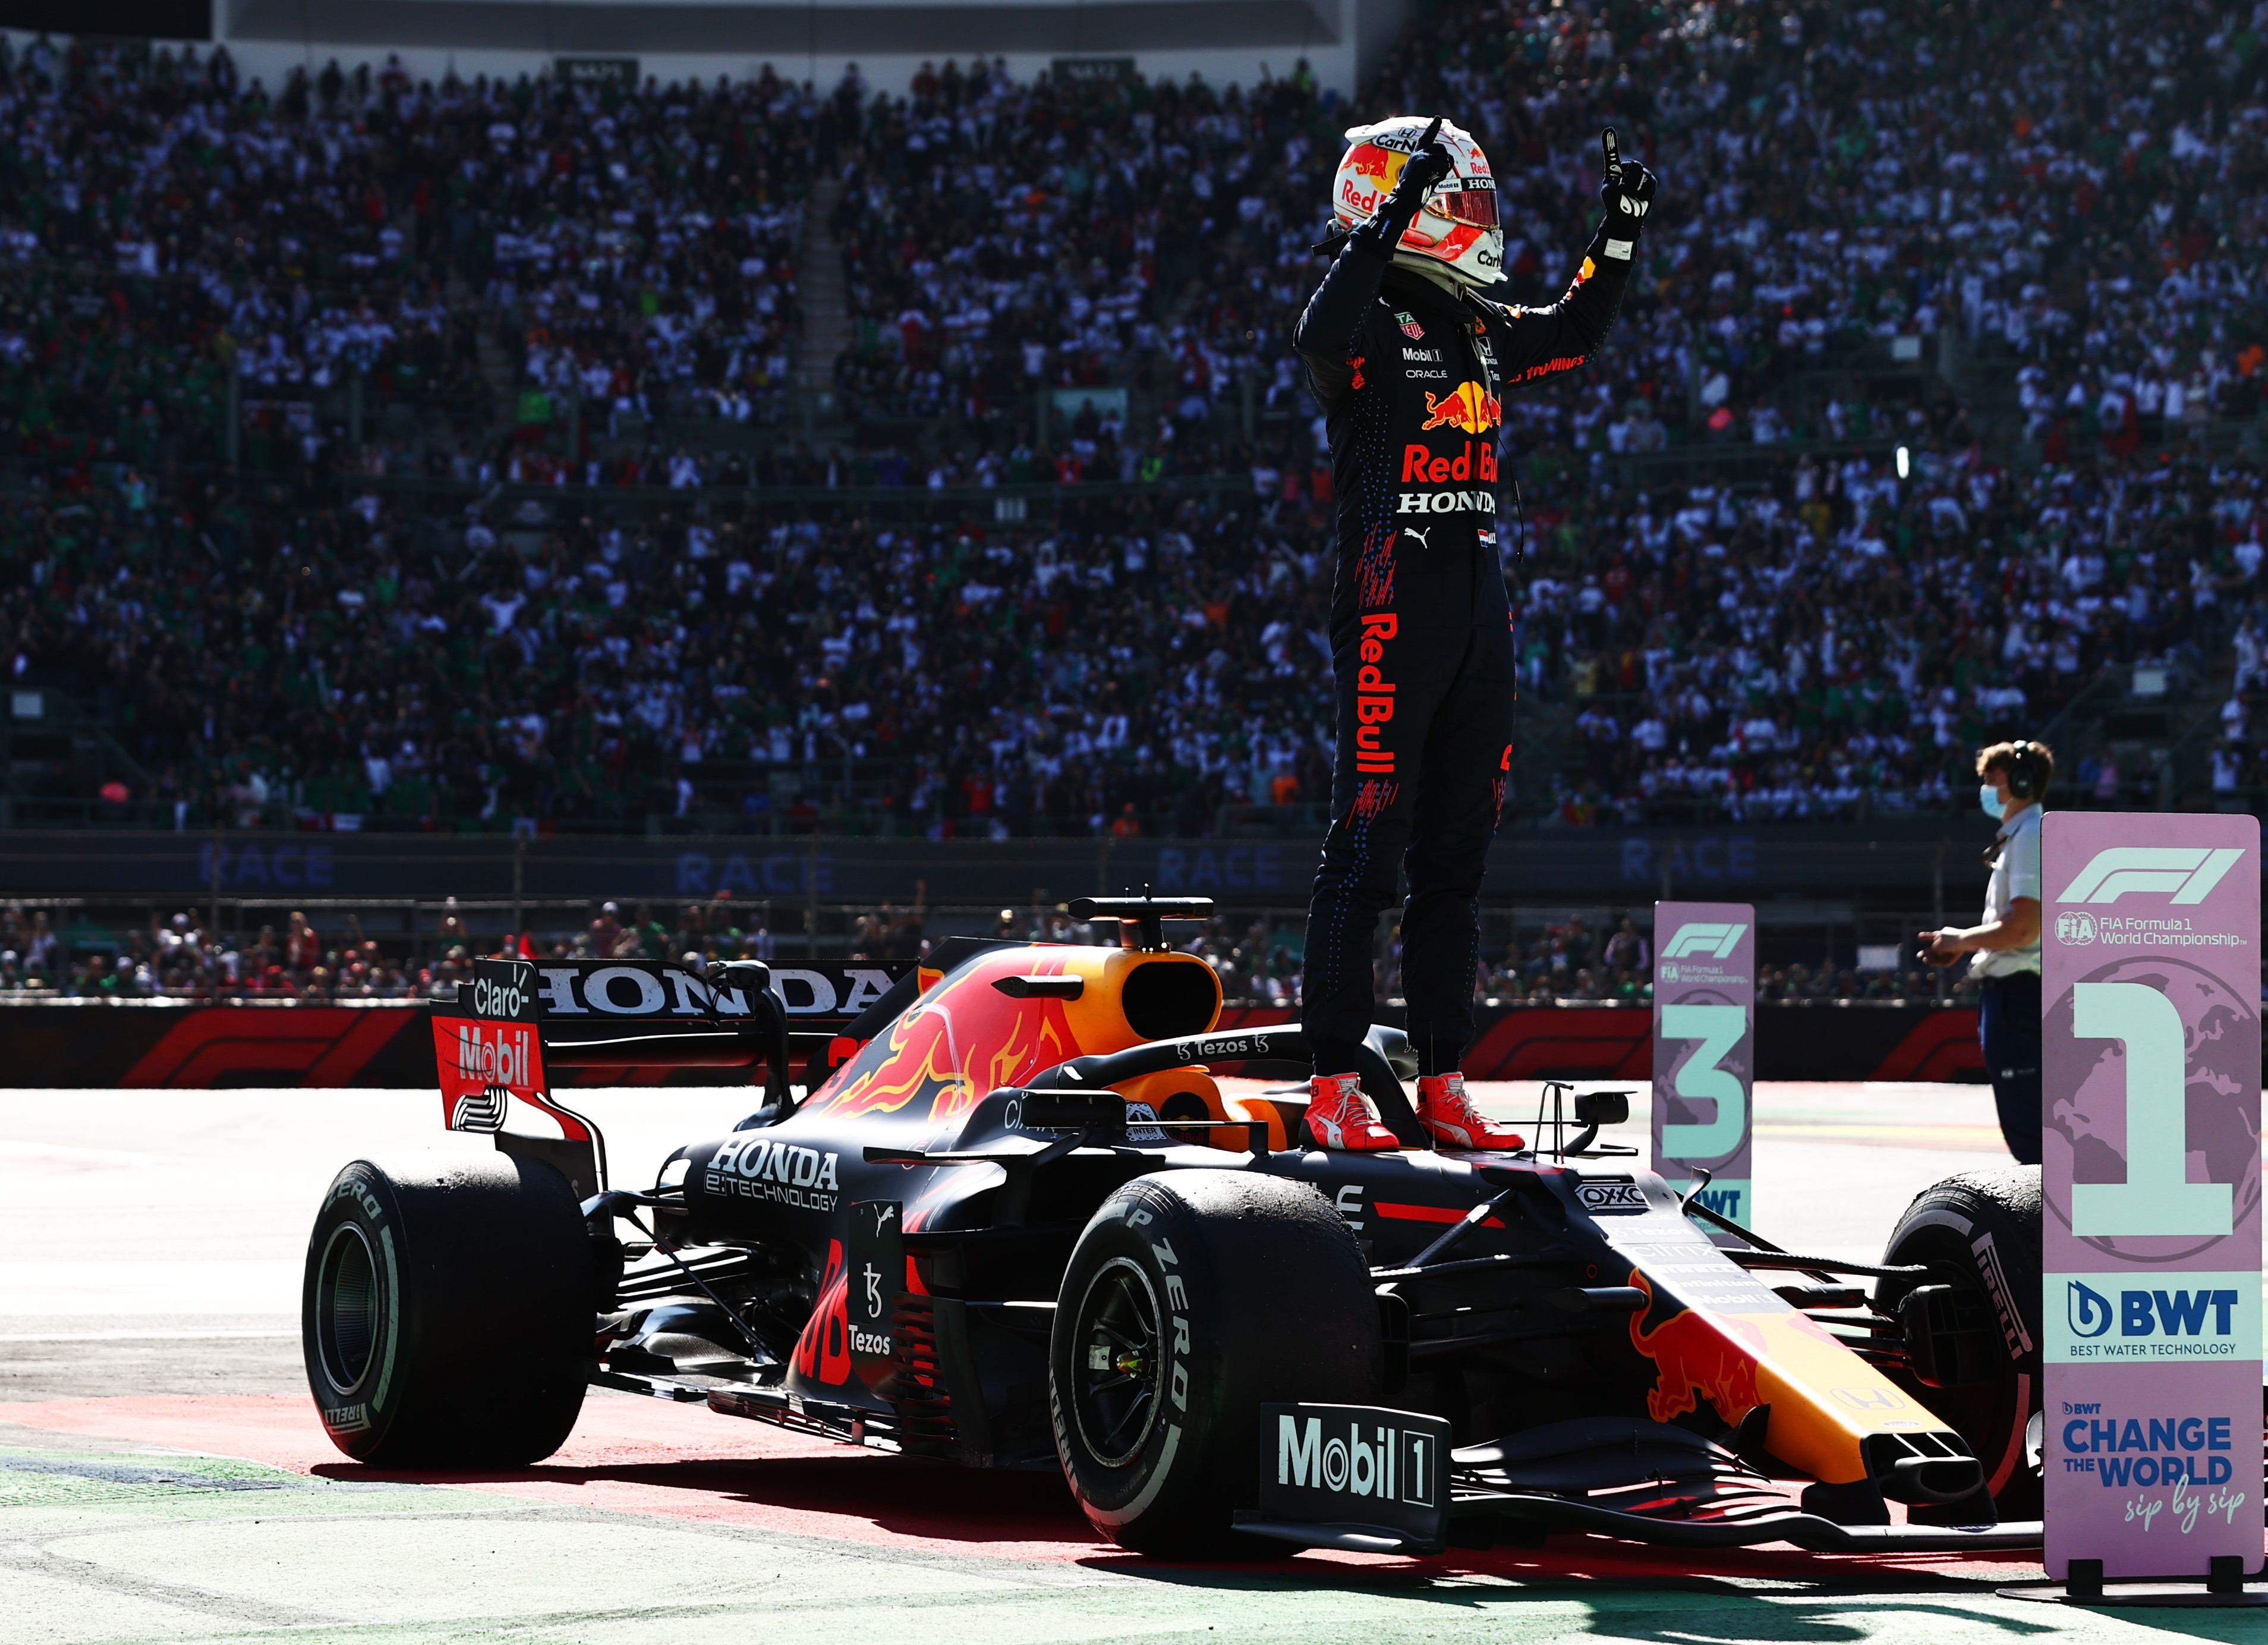 Wallpapers Pictures 2021 Mexico F1 GP